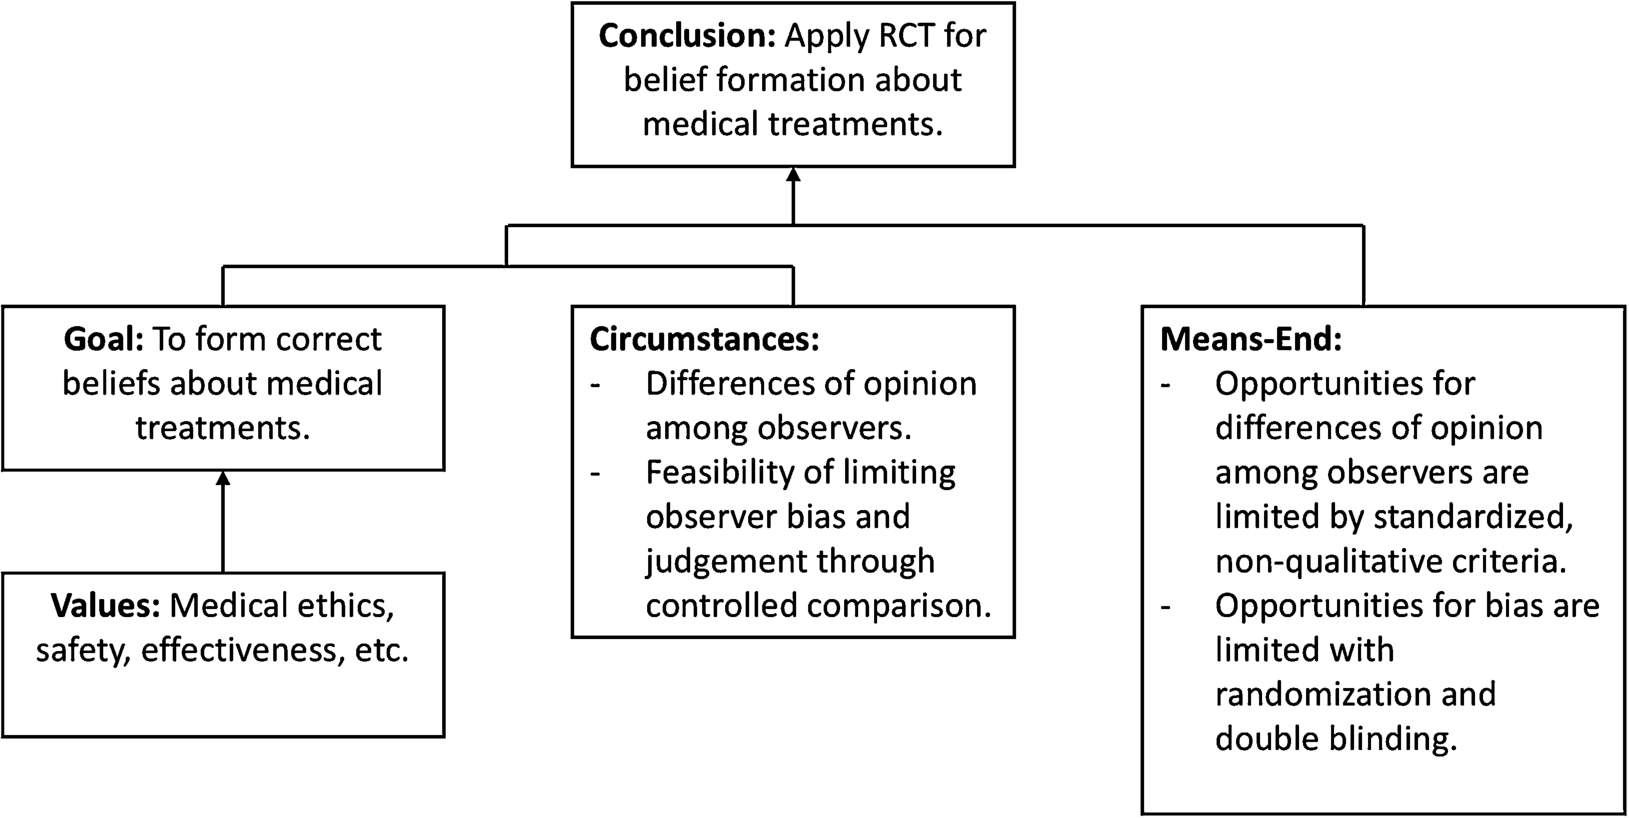 Bradford Hill’s argument for RCT represented as practical reasoning.